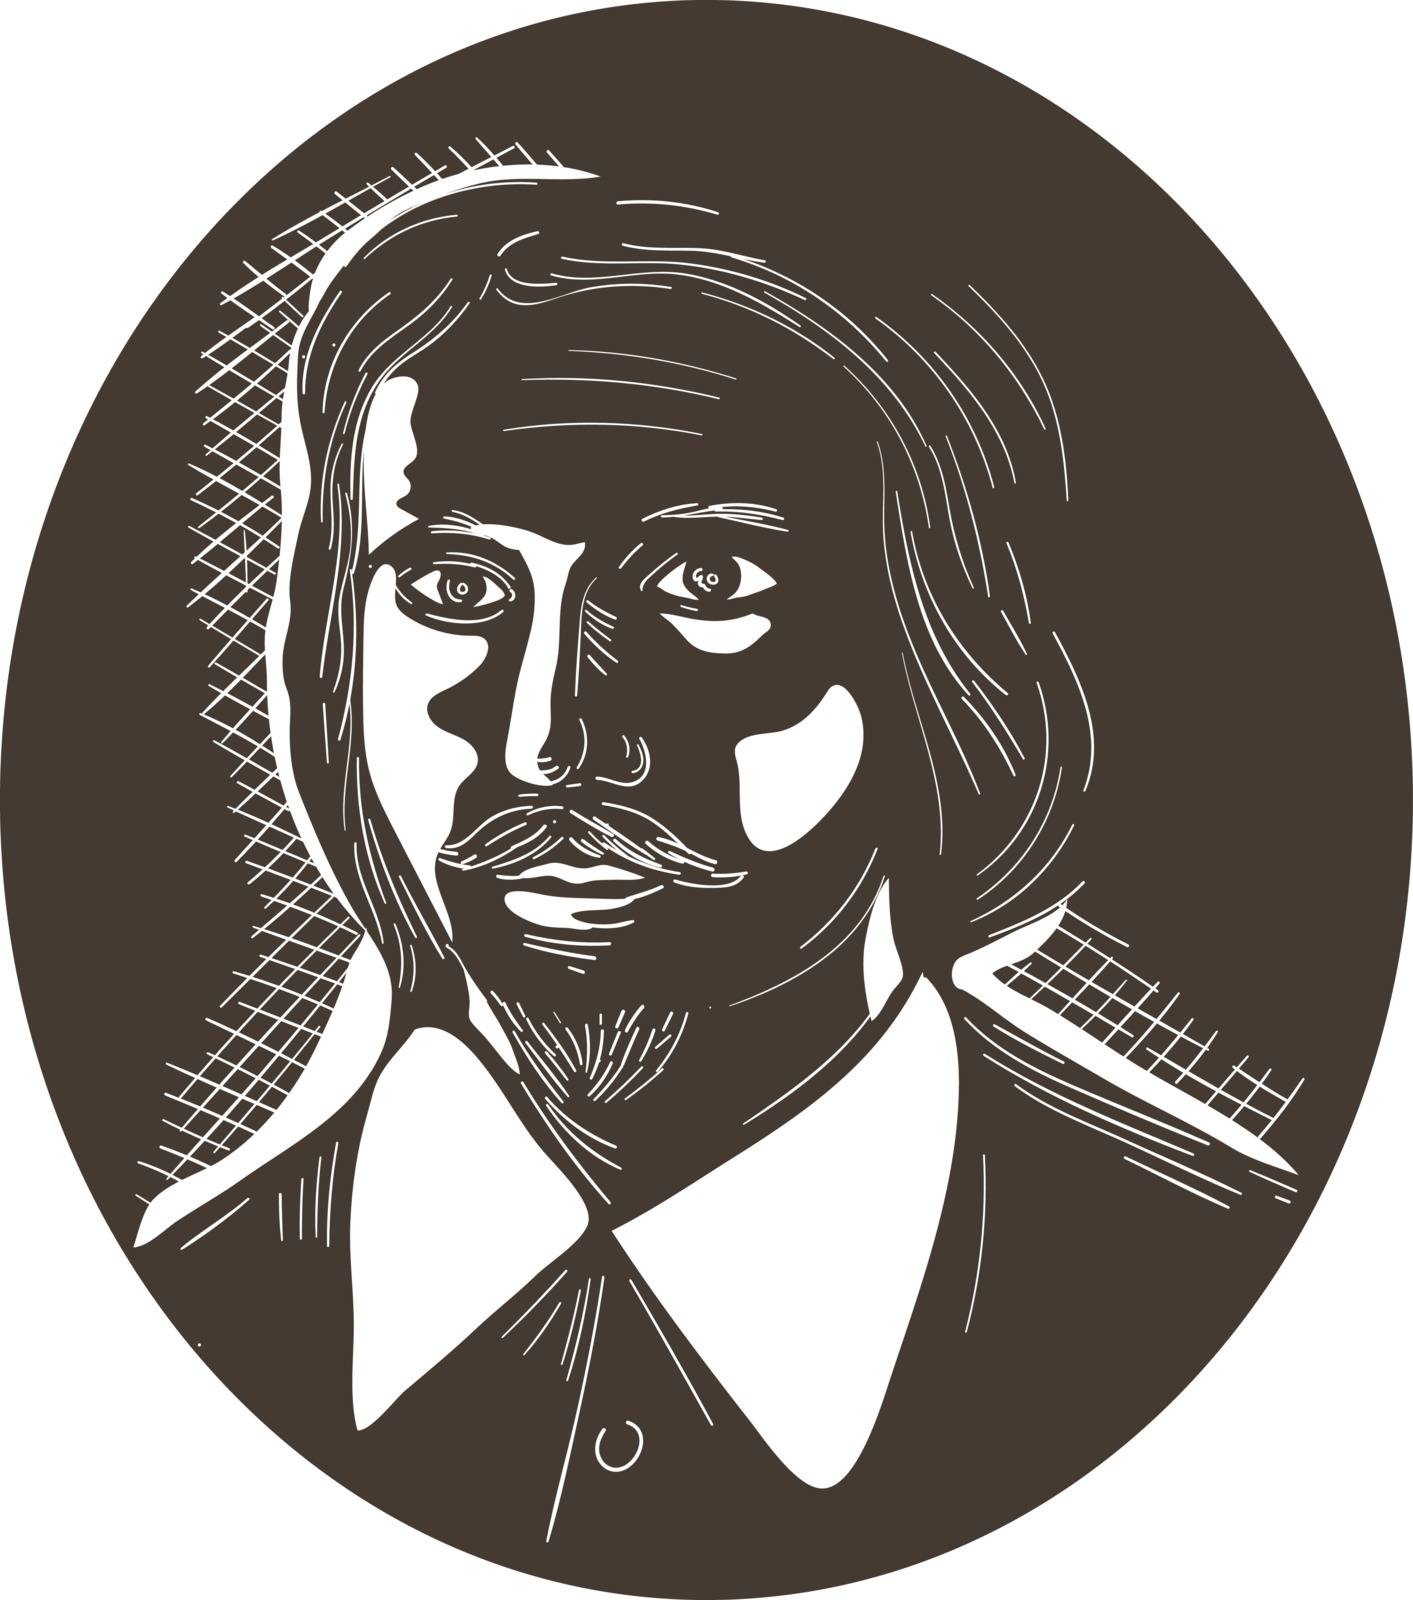 Illustration of a 16th century poet man viewed from front set inside oval shape done in retro woodcut style. 